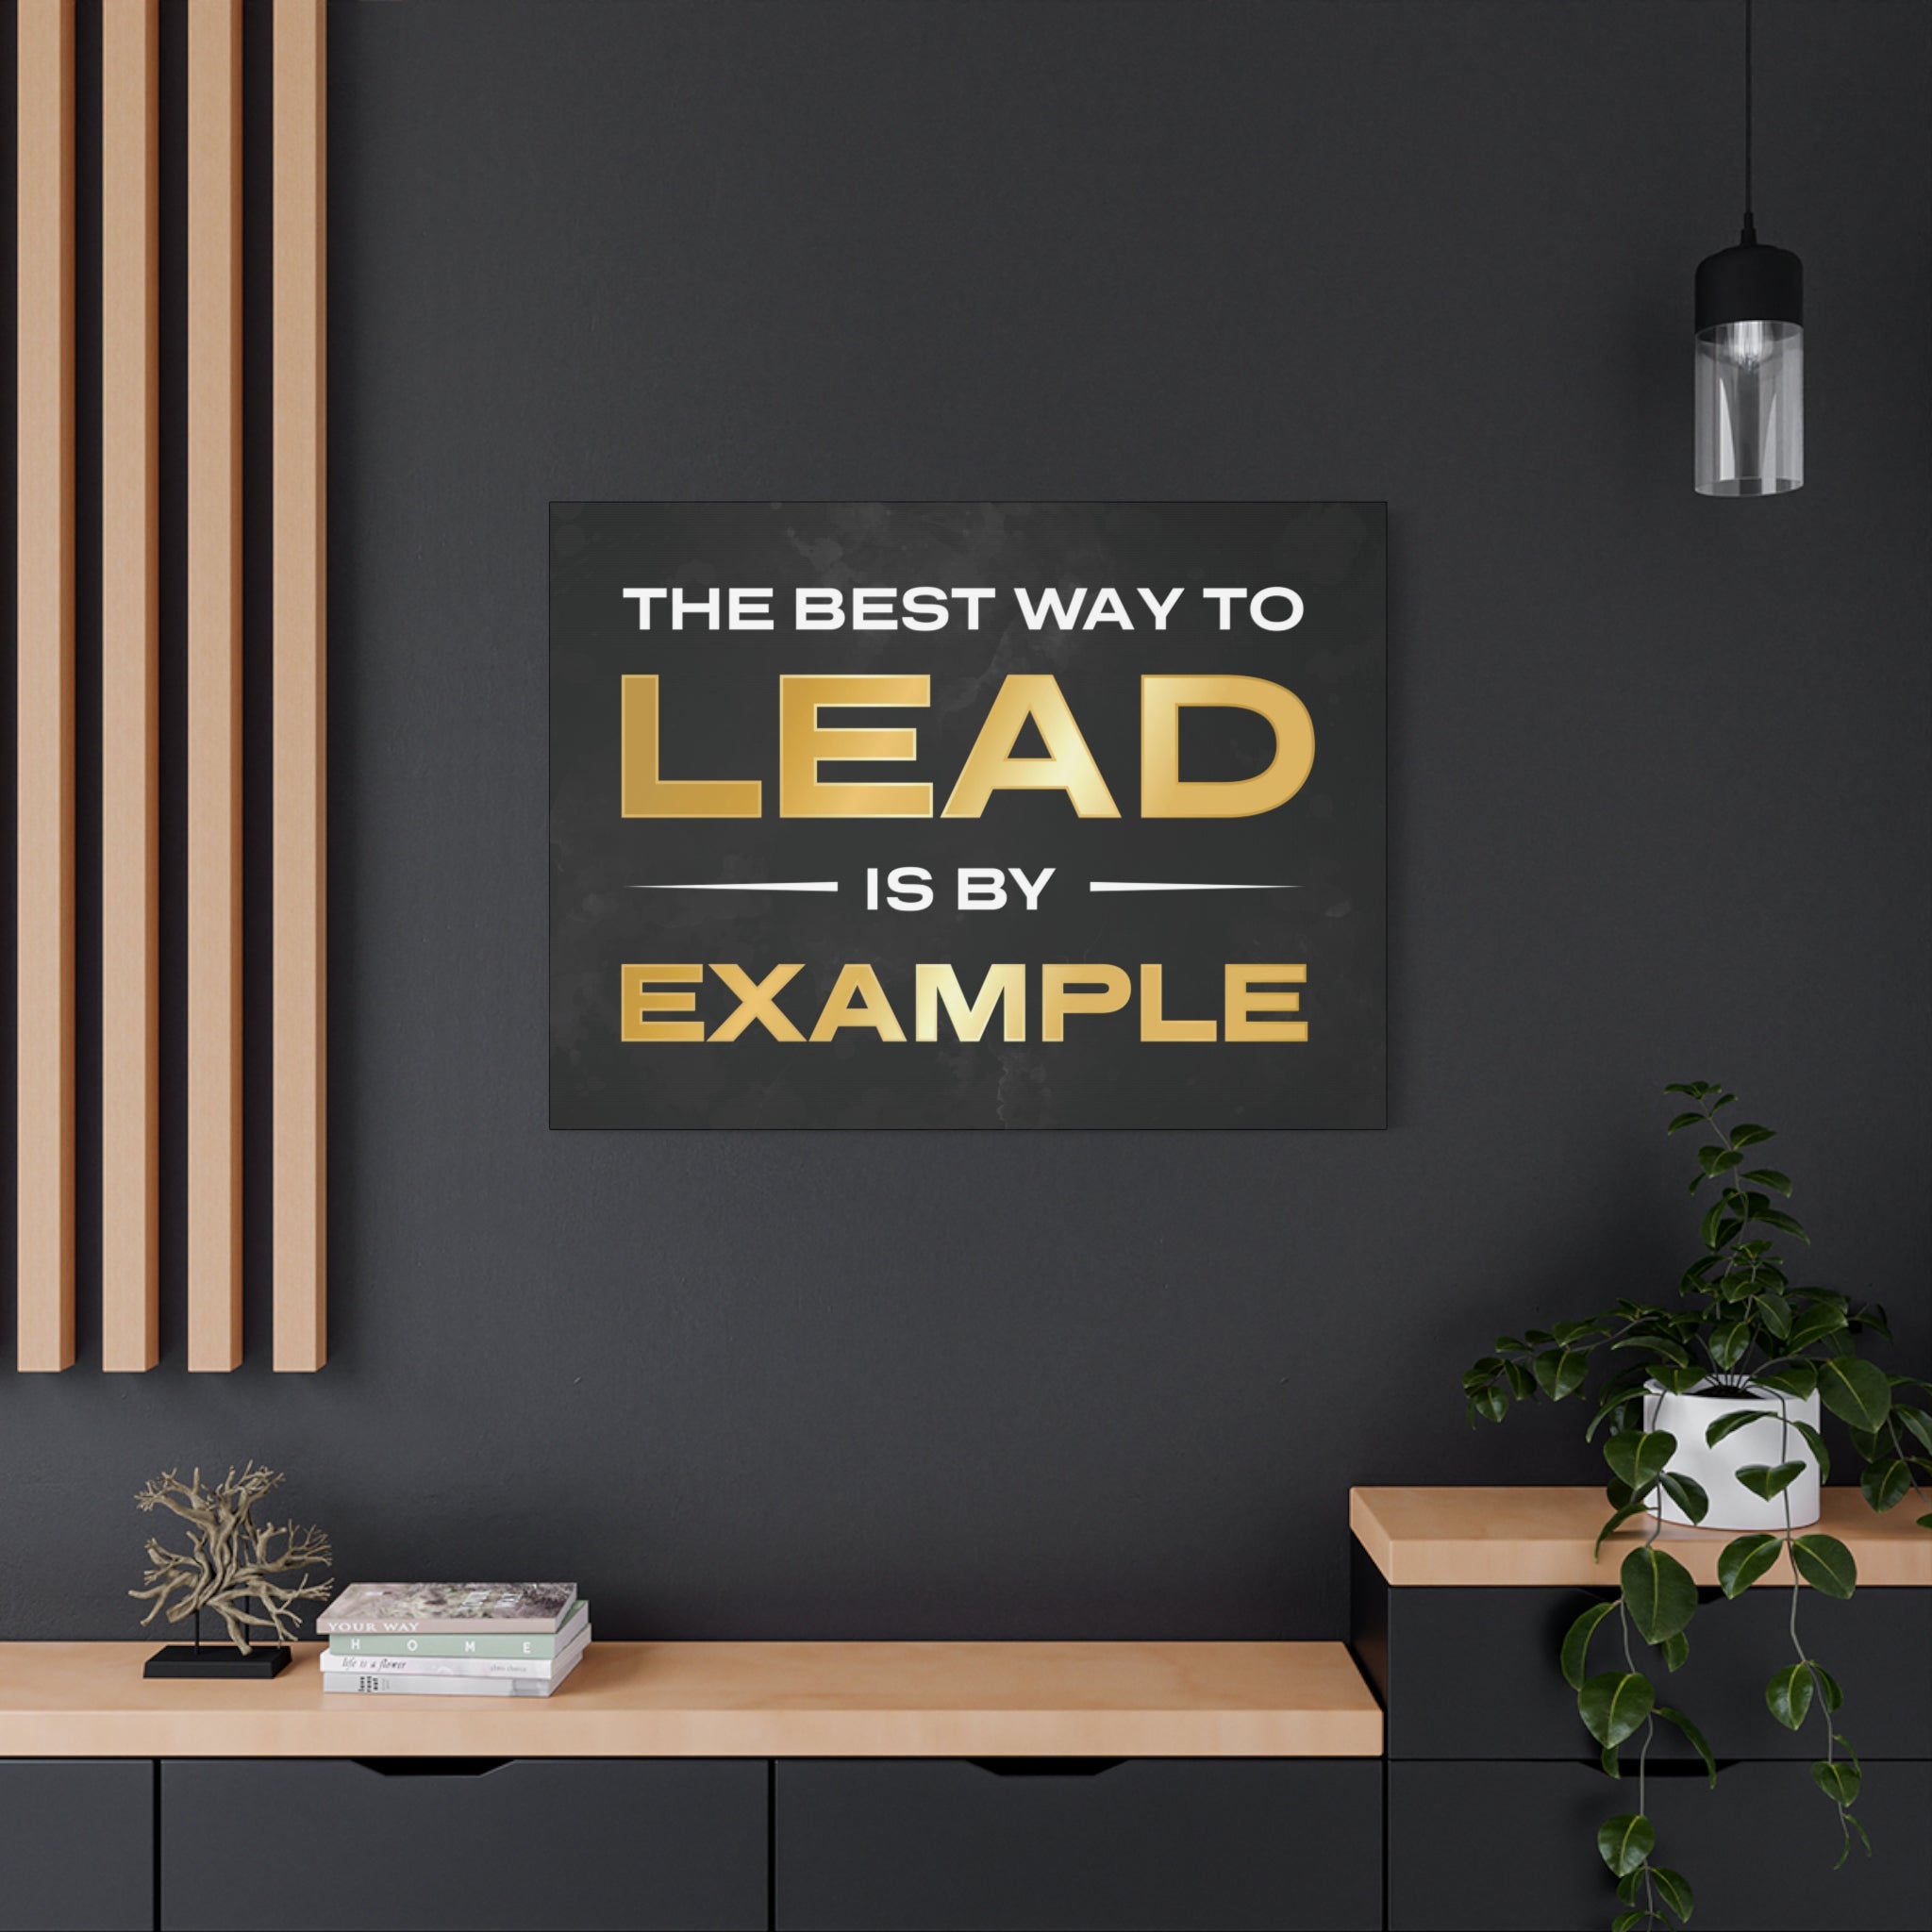 The Best Way To Lead Is By Example Wall Art additional image 3